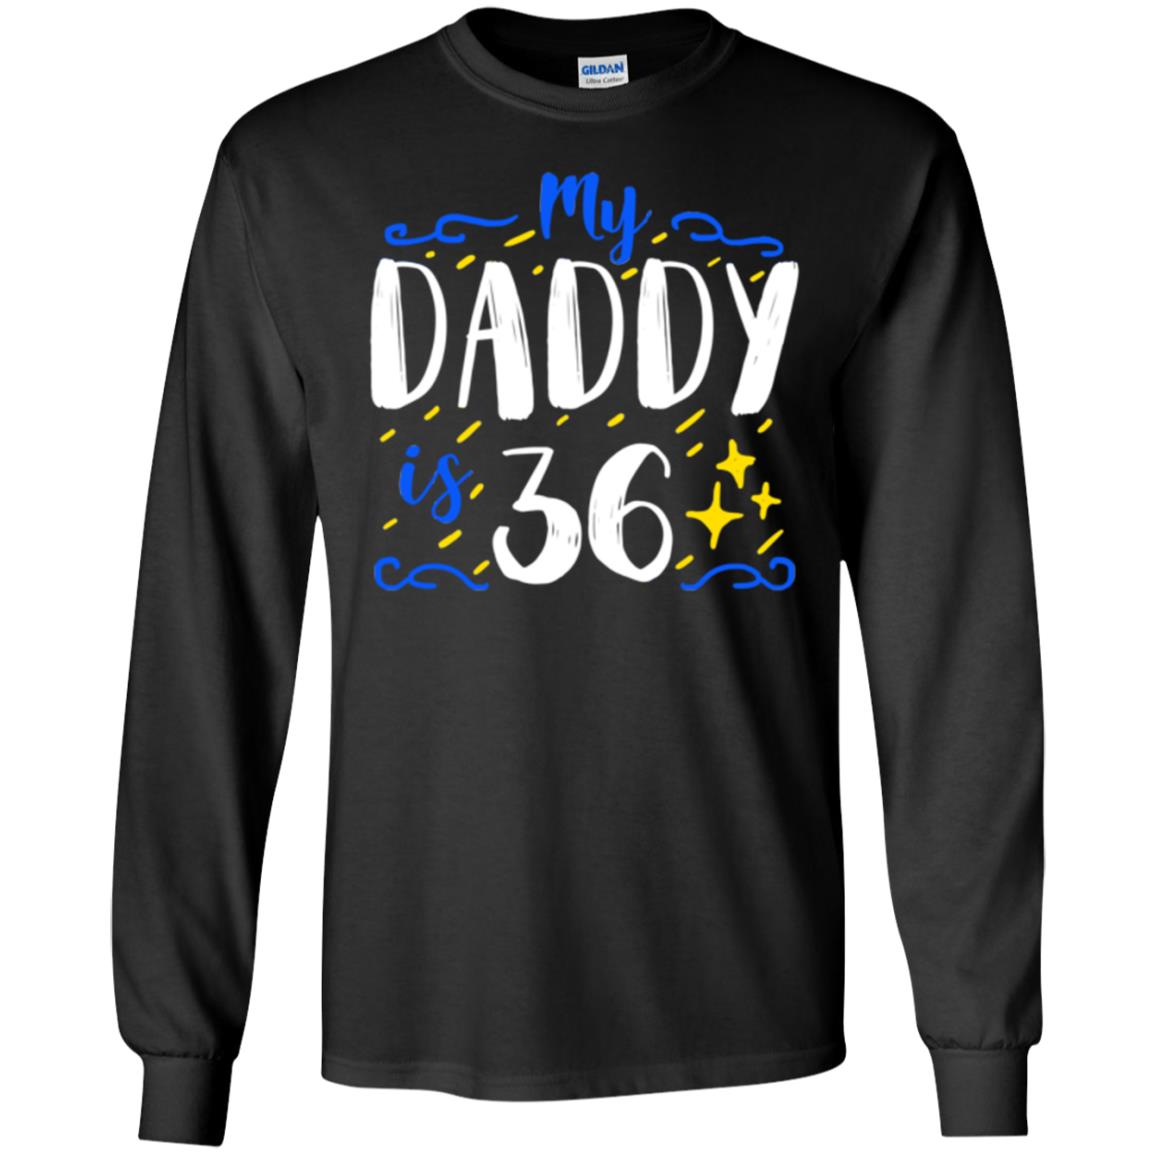 My Daddy Is 36 36th Birthday Daddy Shirt For Sons Or DaughtersG240 Gildan LS Ultra Cotton T-Shirt